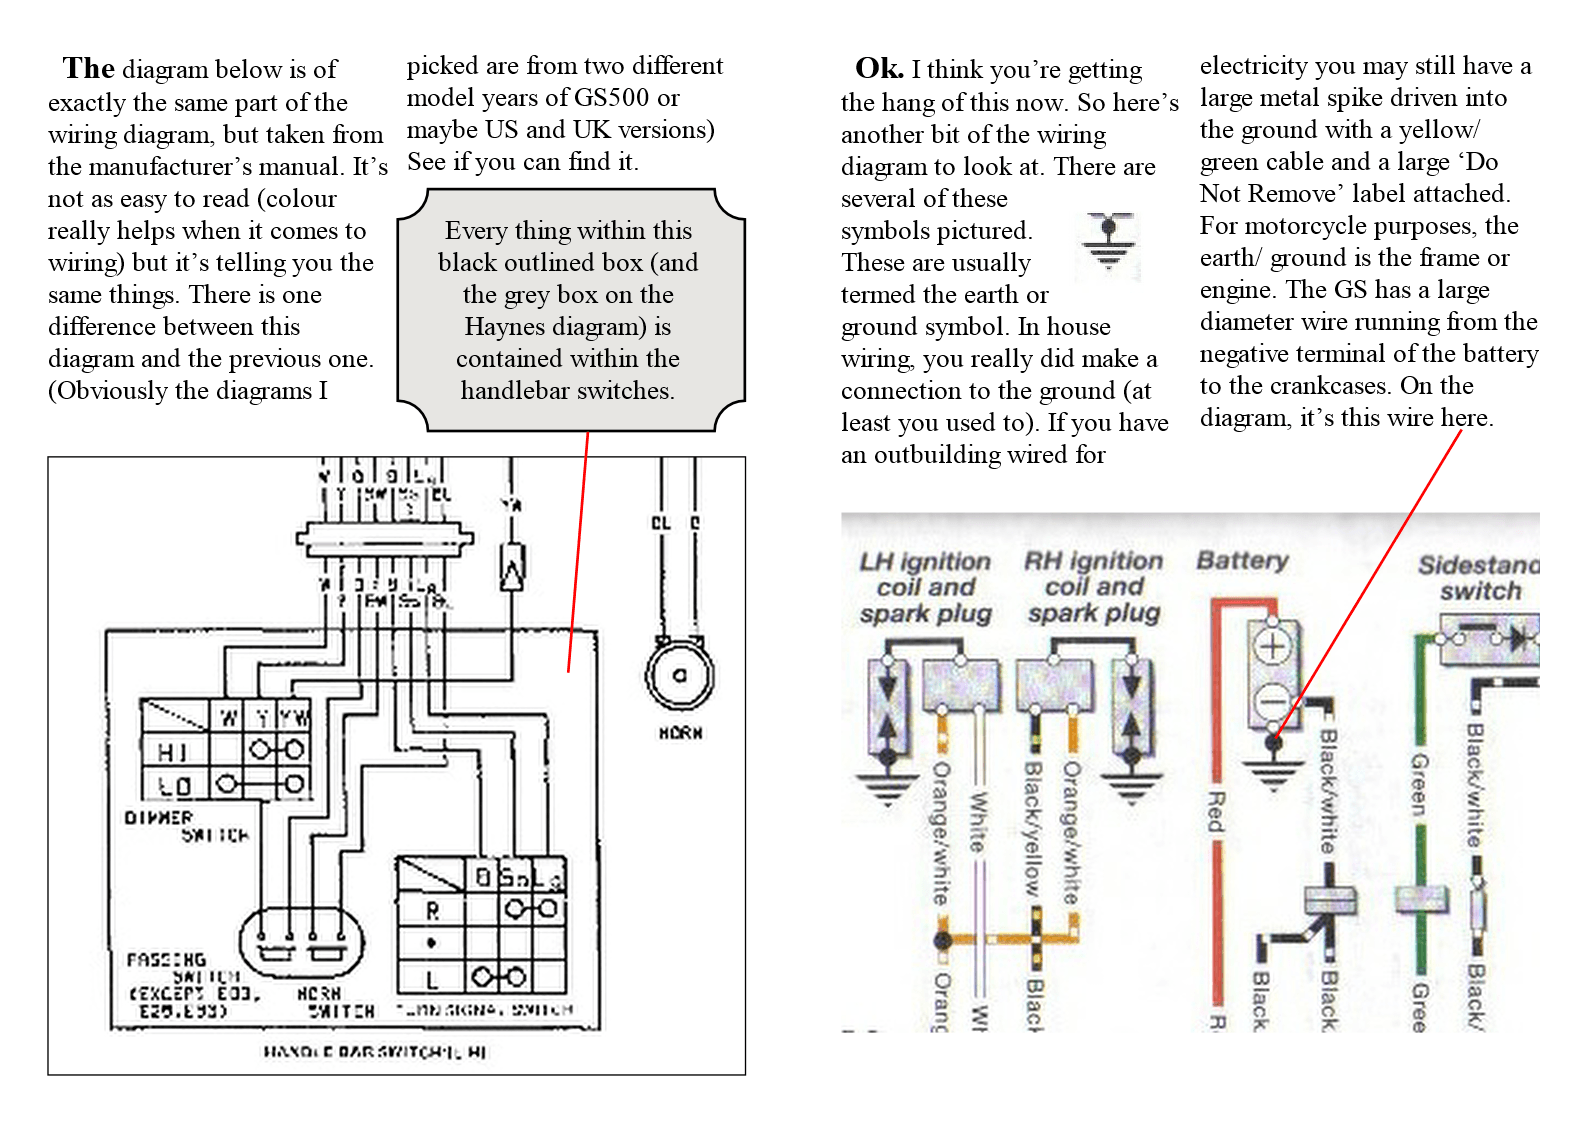 Introduction to motorcycle wiring diagrams